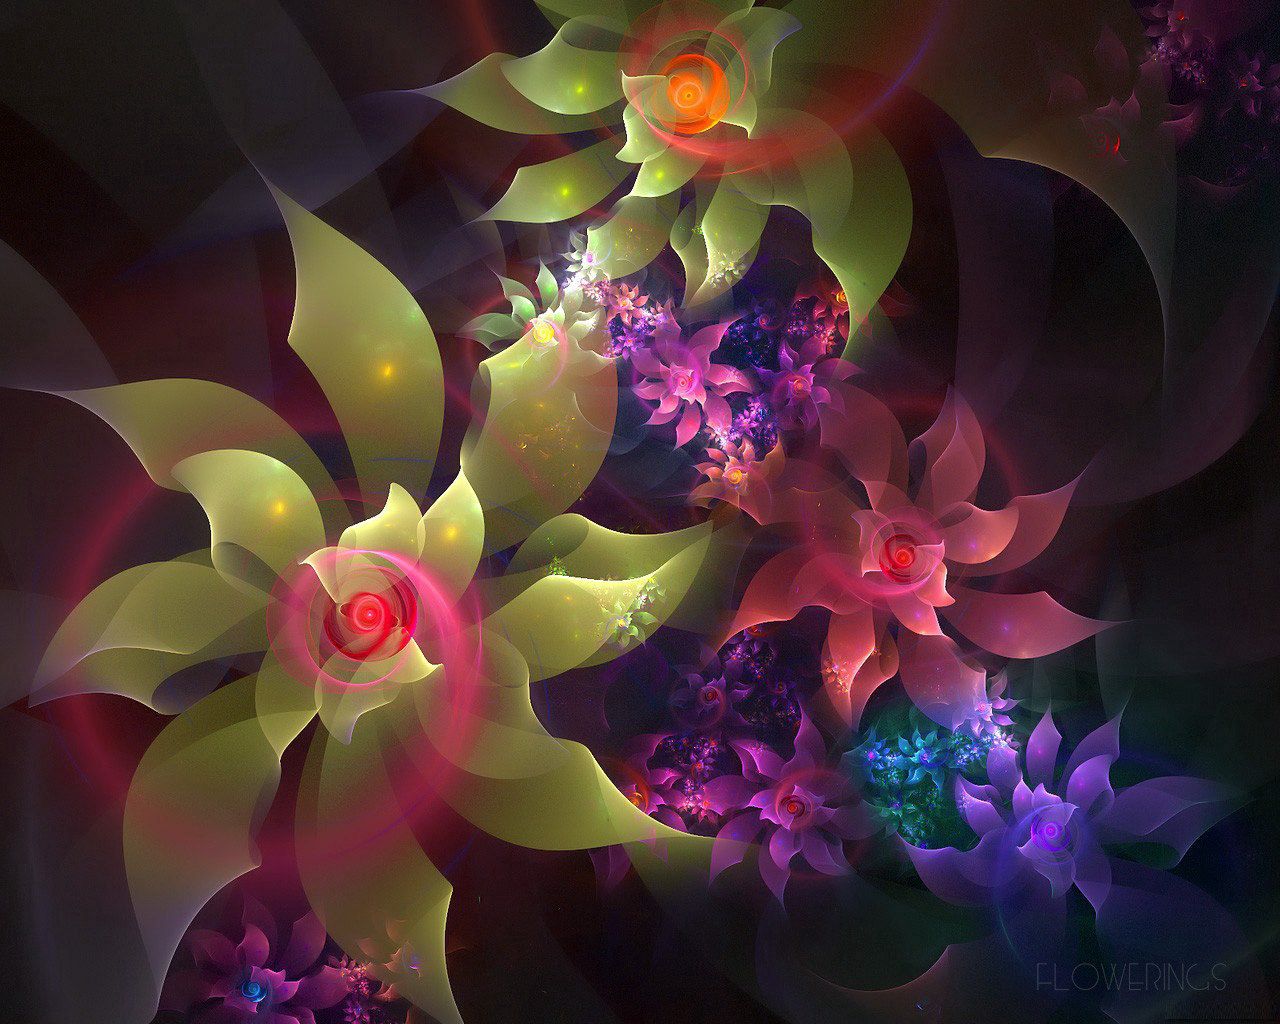 motley, multicolored, abstract, bloom, flowering